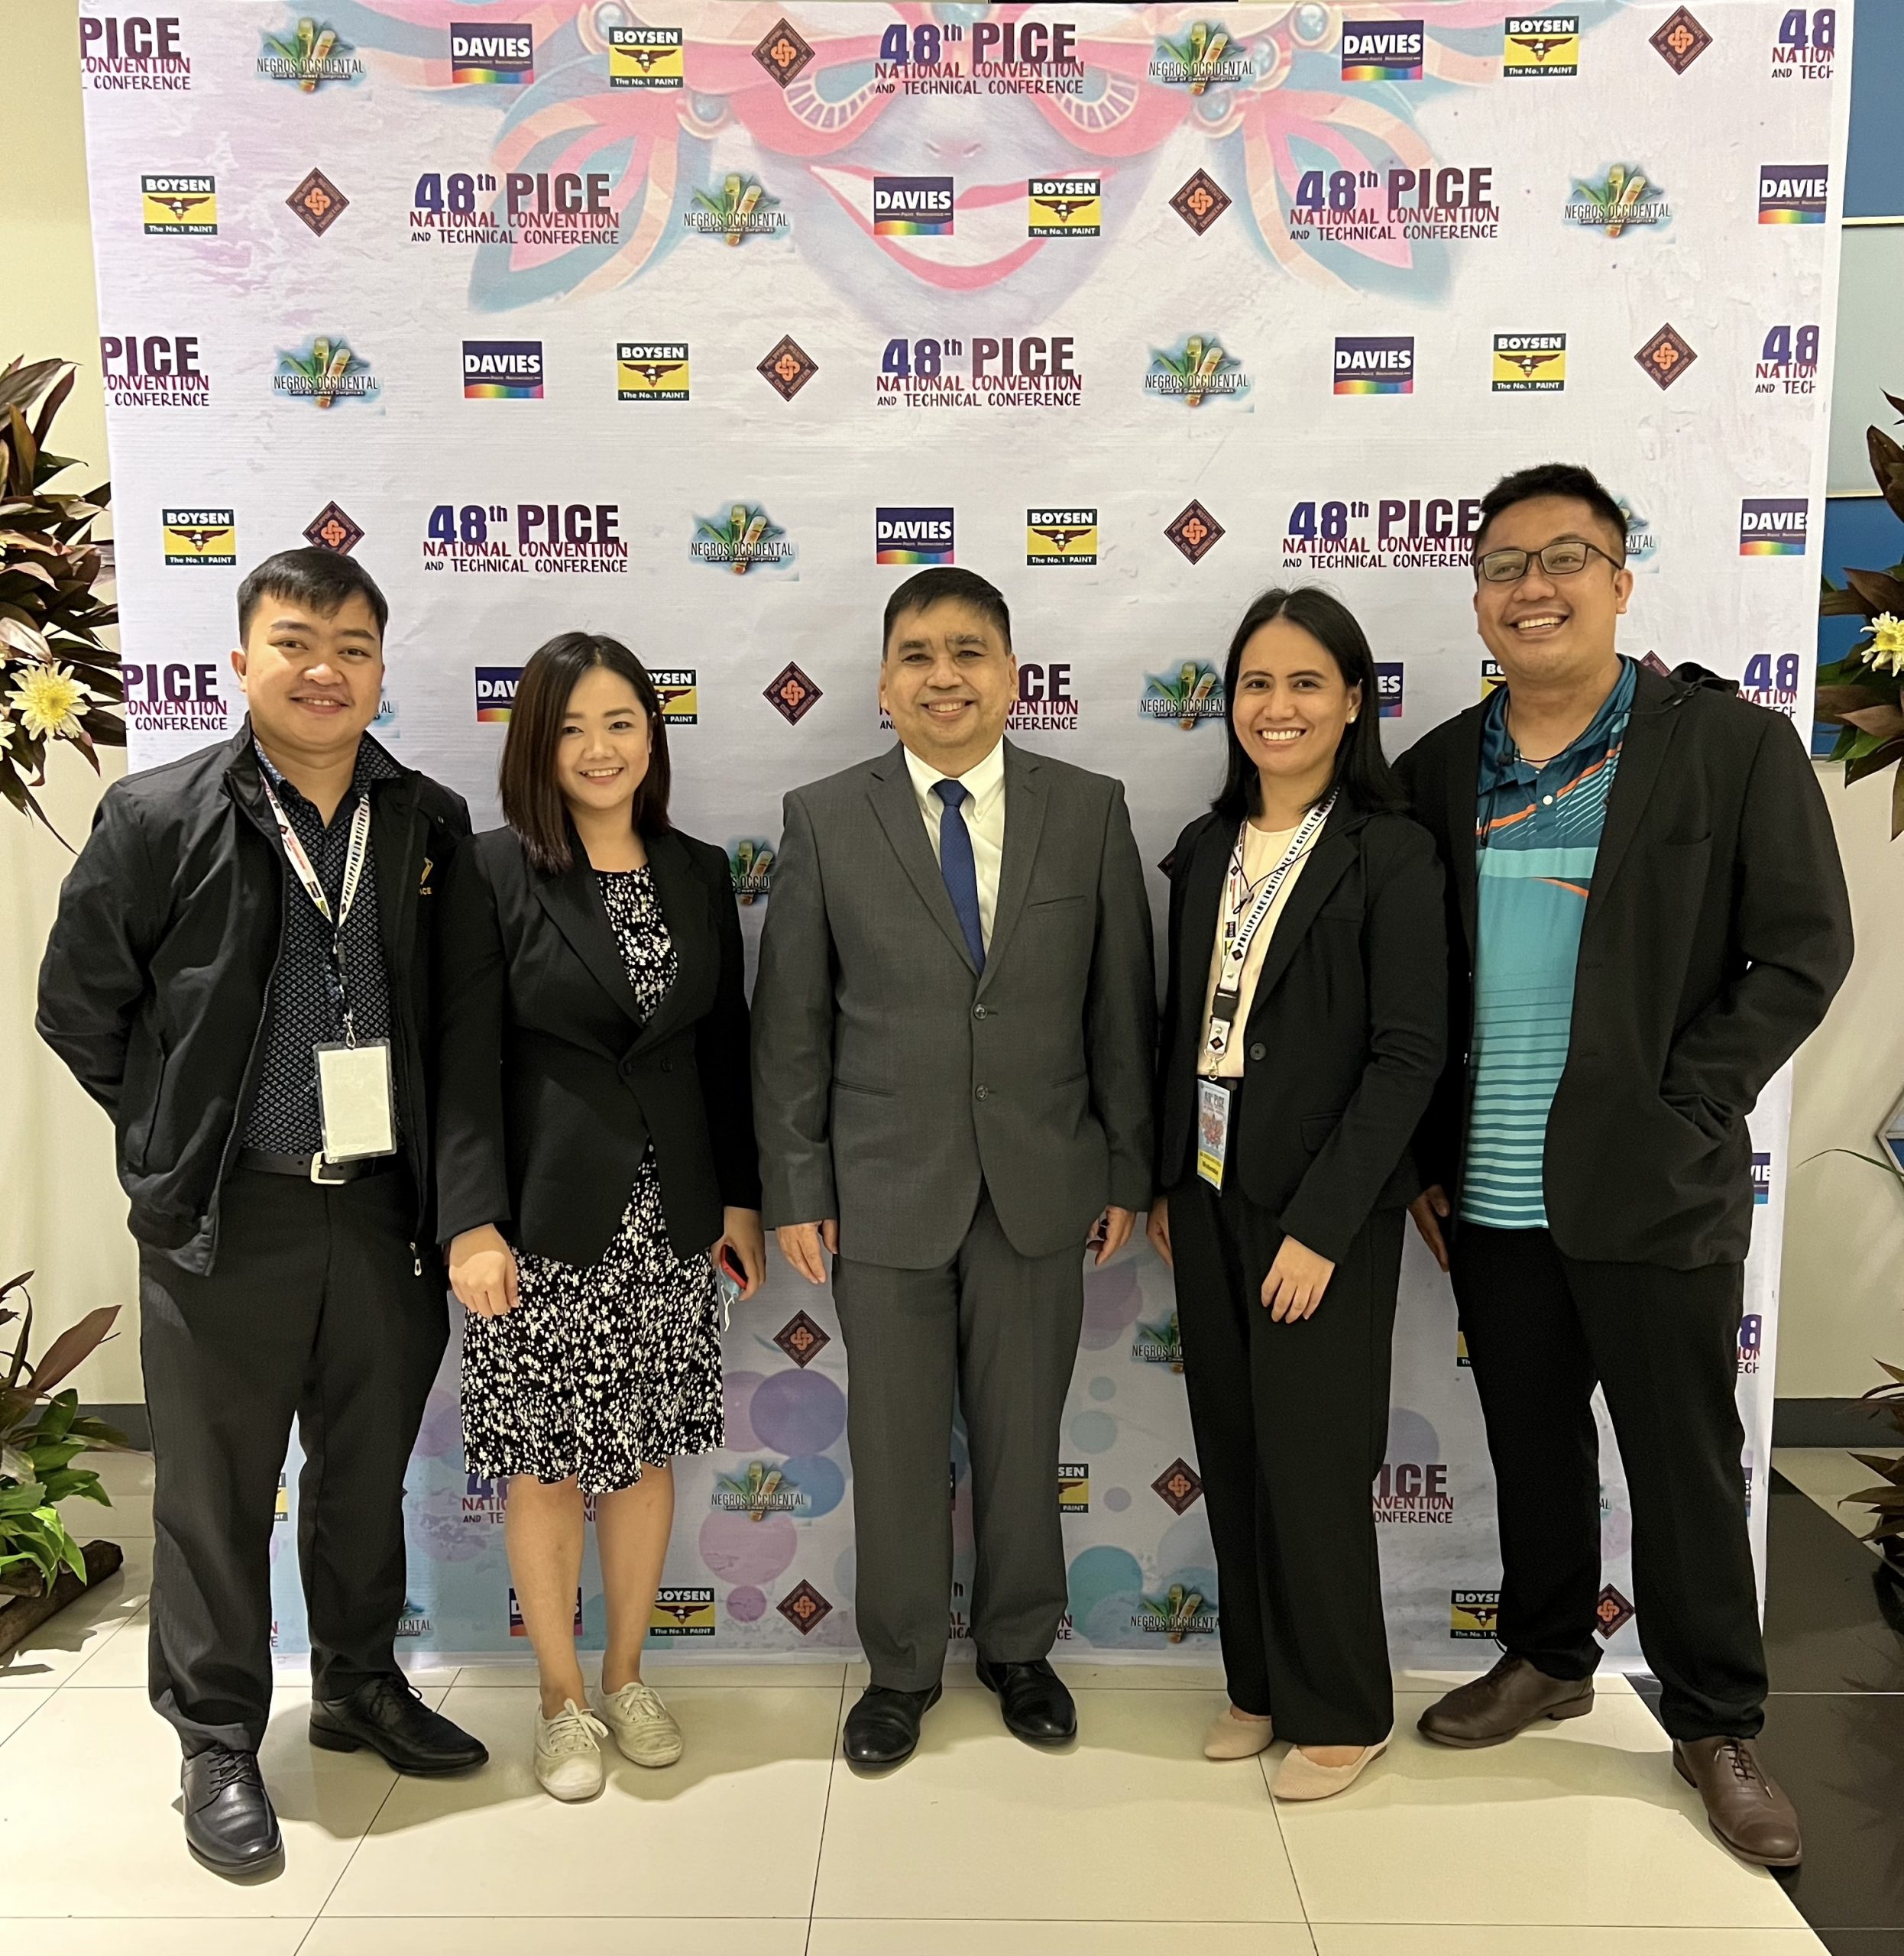 UP ICE faculty and alumni participate at the 48th PICE National Convention and Technical Conference